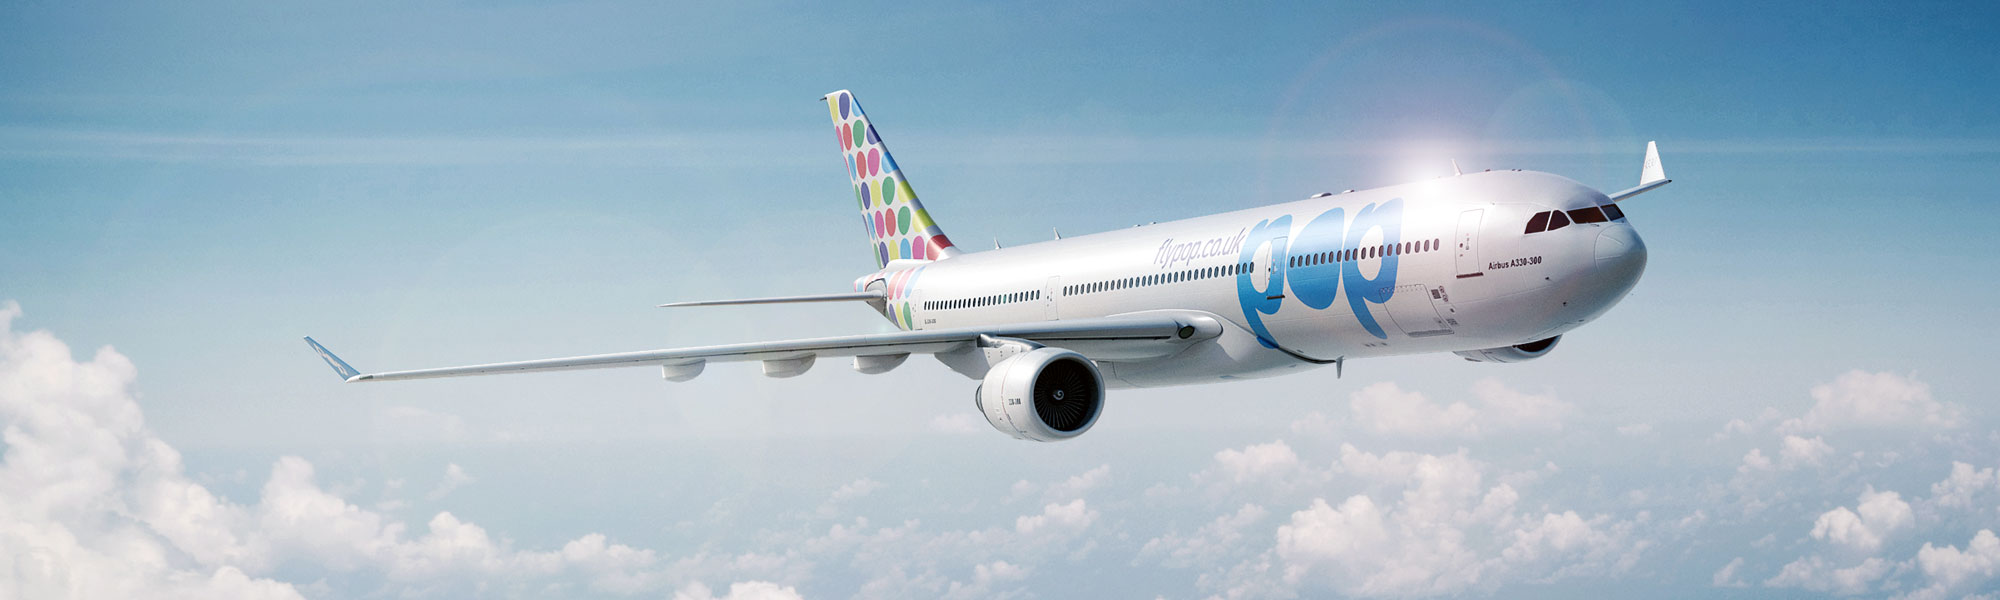 Could a UK startup become the world’s first ‘carbon neutral’ airline?